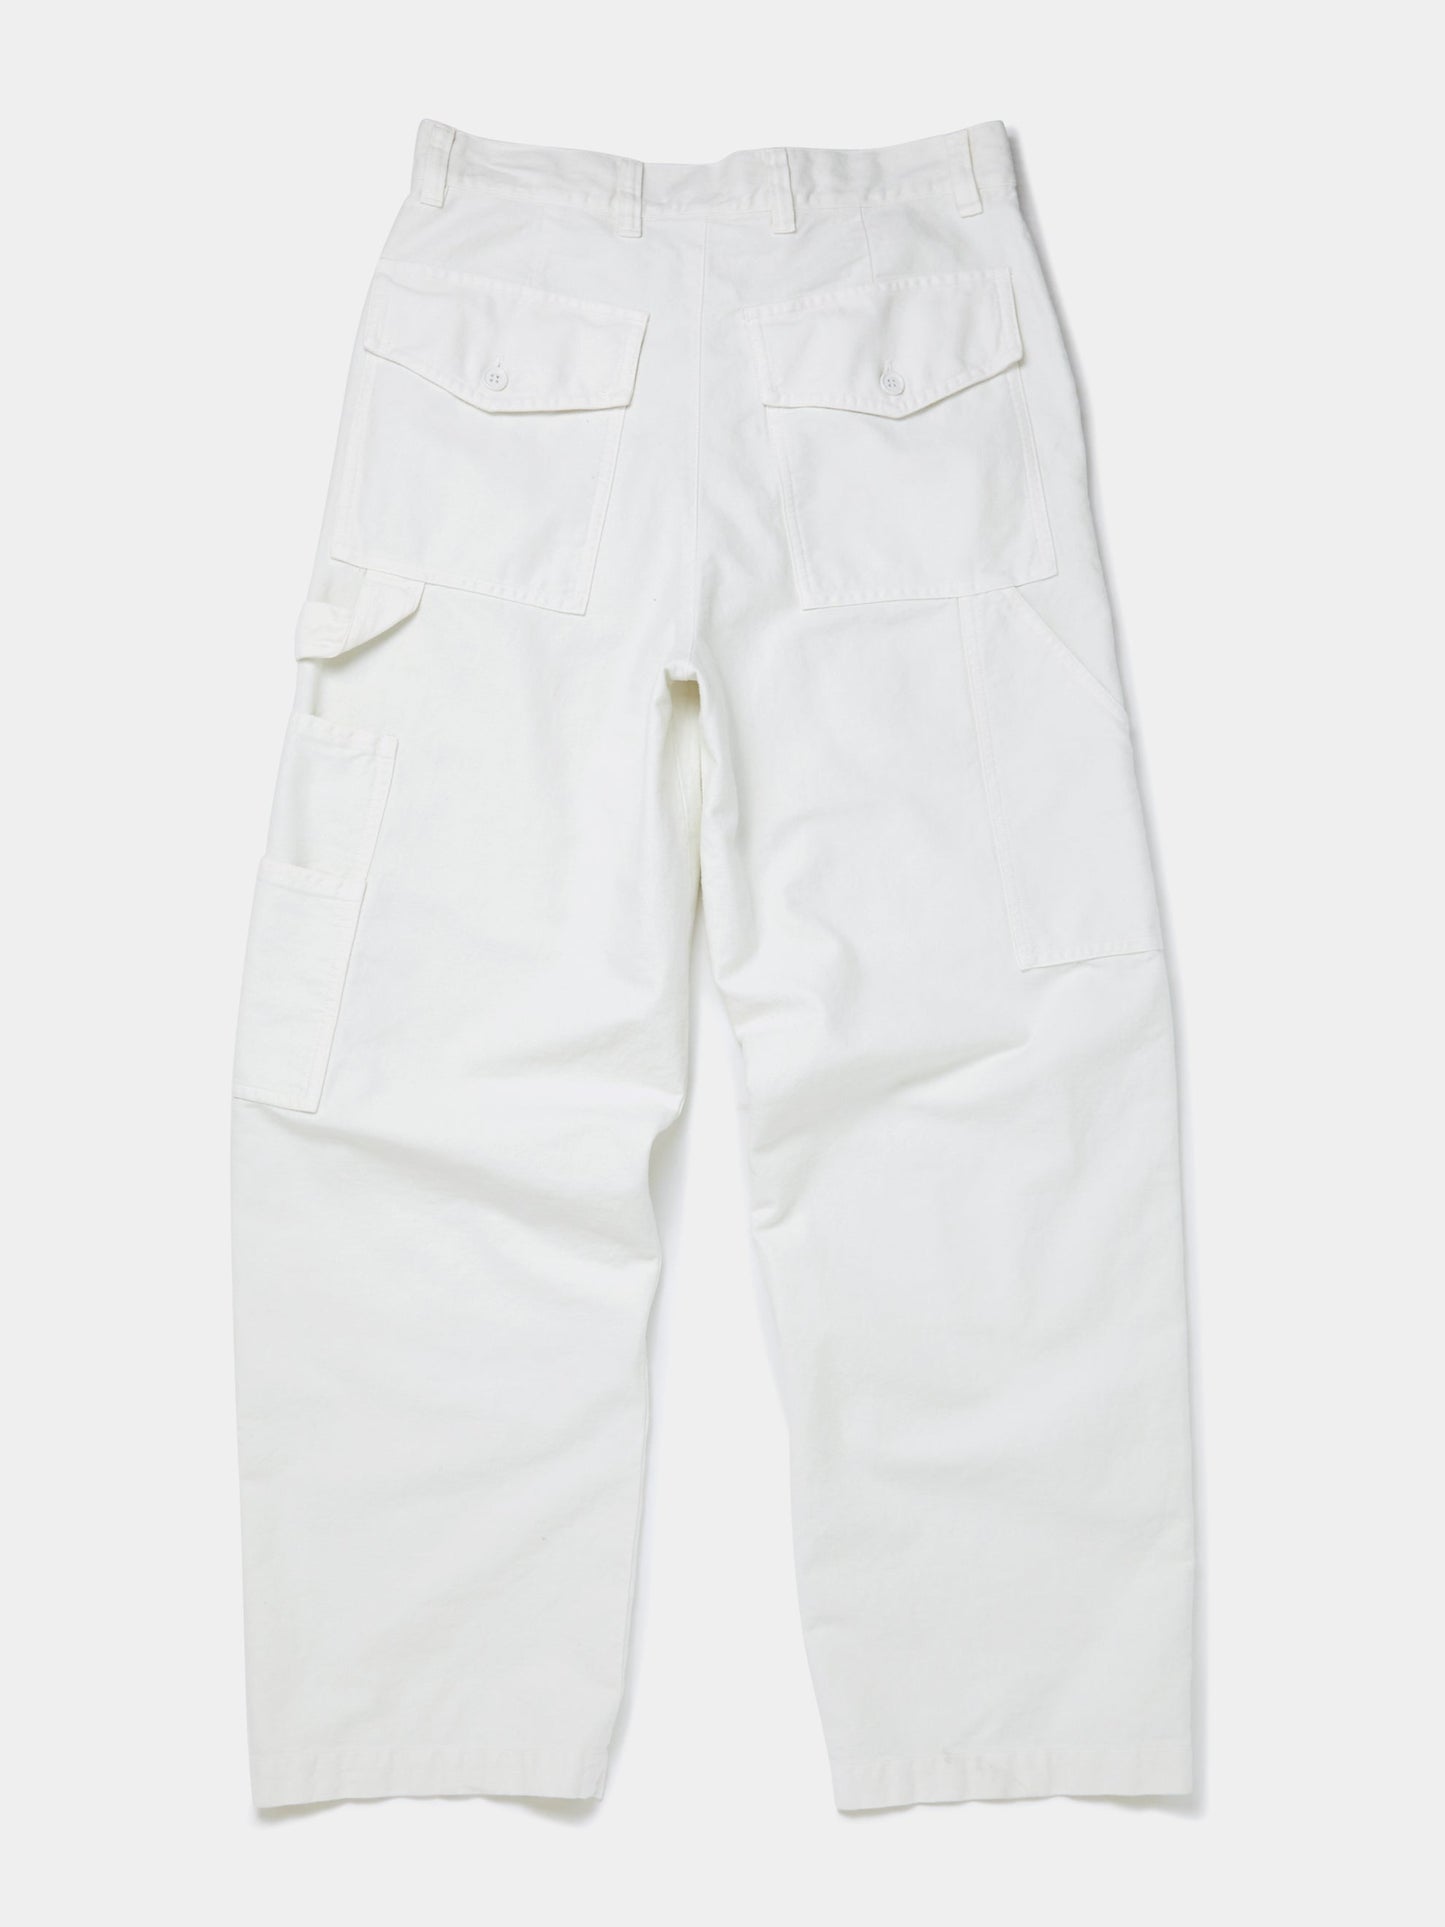 Packard Trousers (Off White)